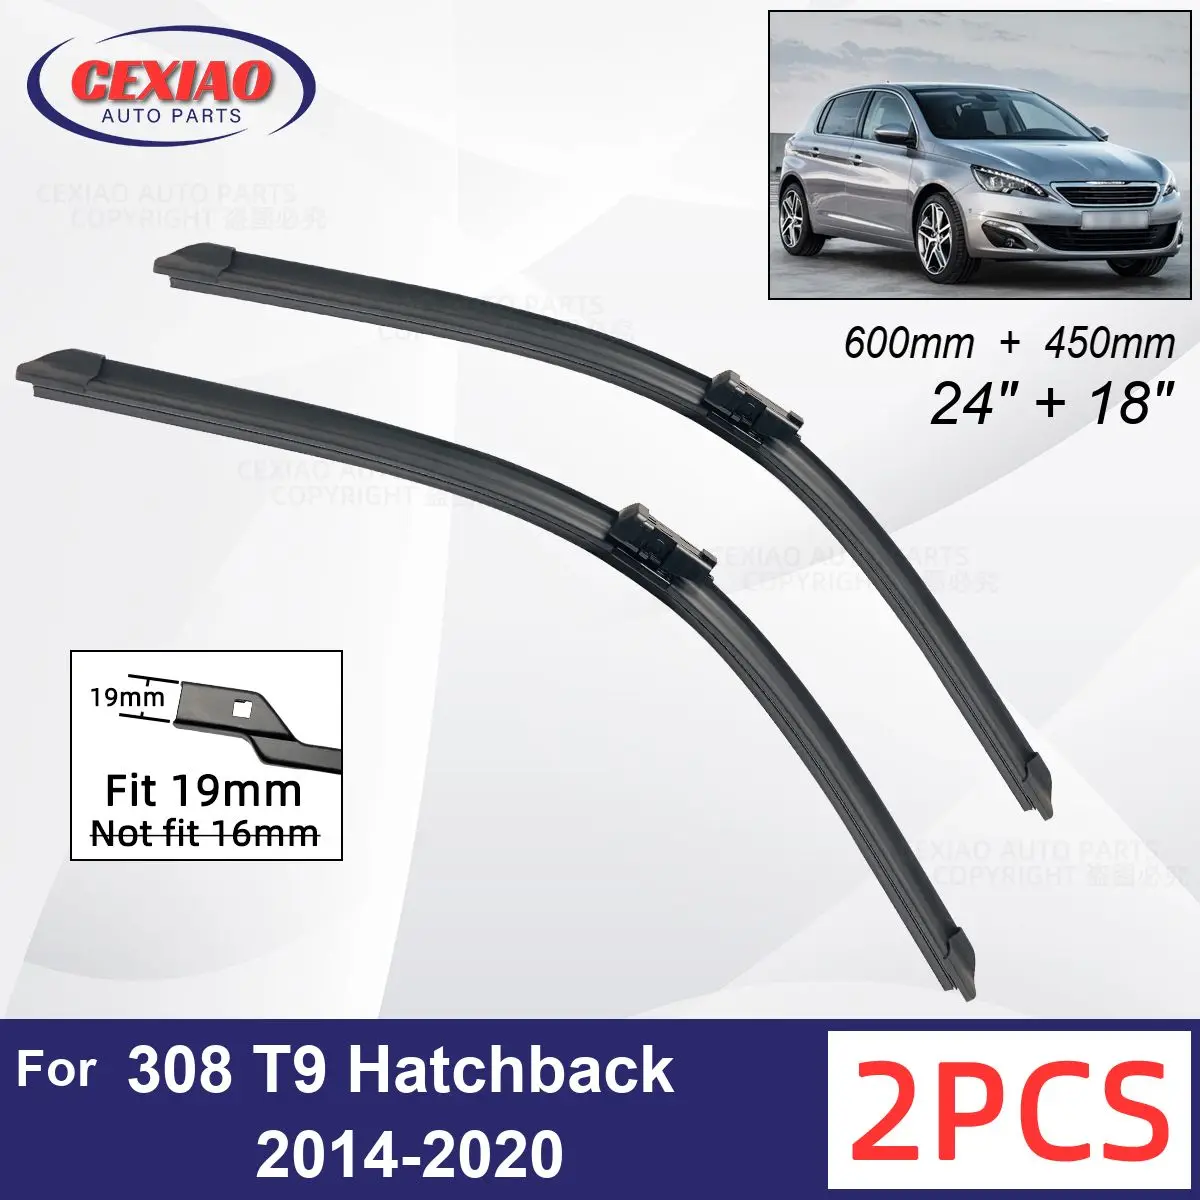 

Car Wiper For Peugeot 308 T9 Hatchback 2014-2020 Front Wiper Blades Soft Rubber Windscreen Wipers Auto Windshield 600mm 450mm